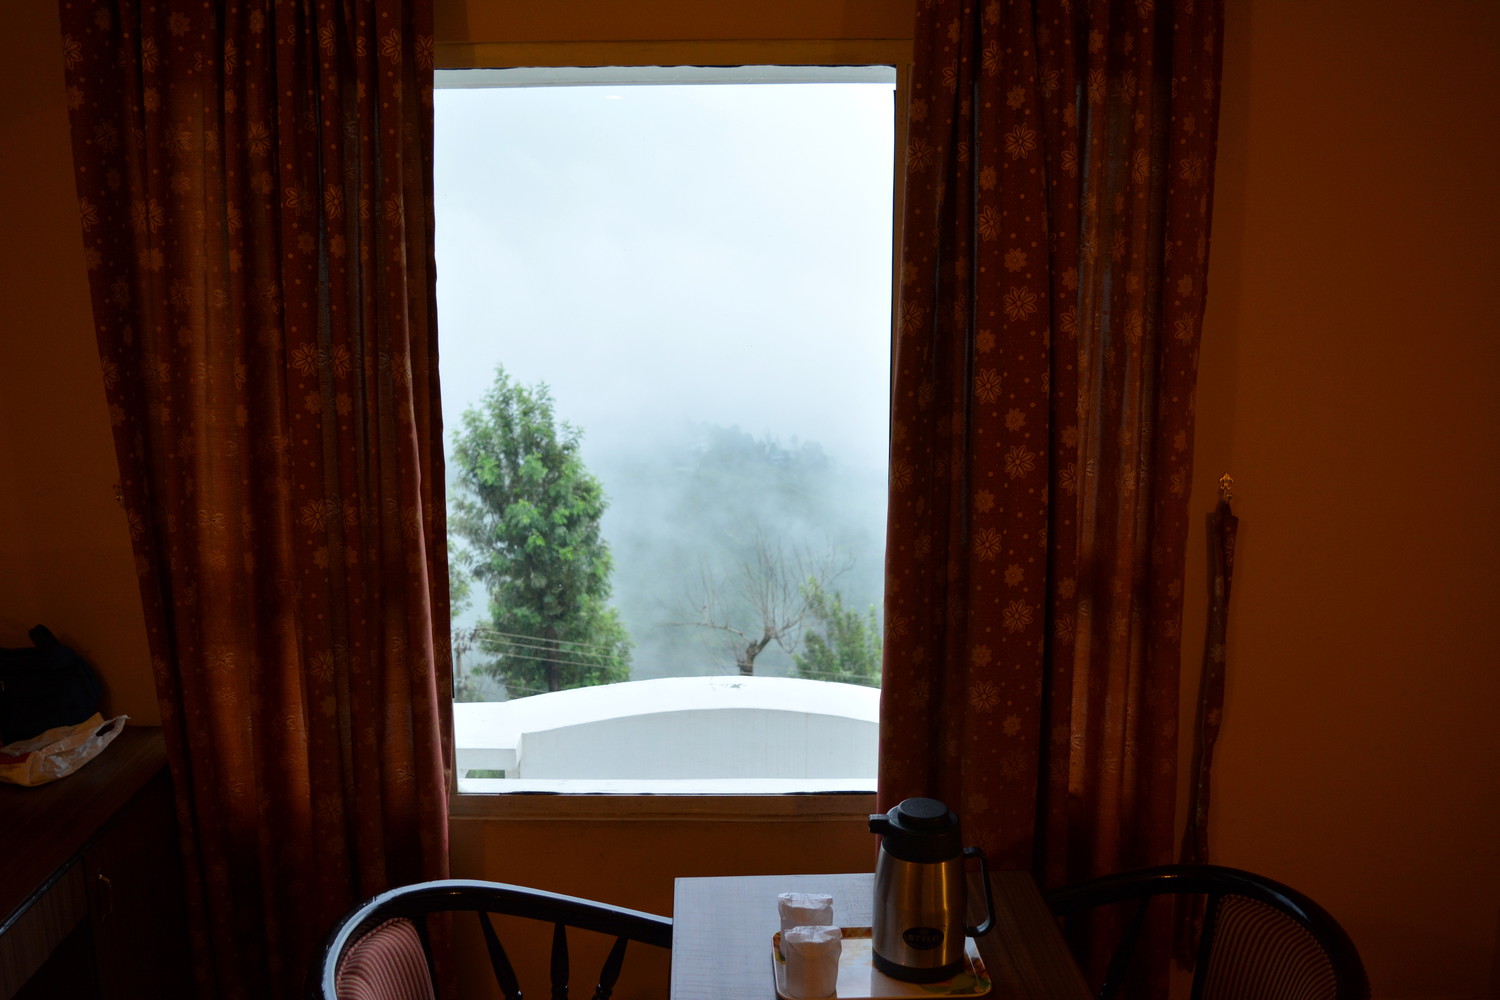 Hills covered with mist visible from the window of a hotel room